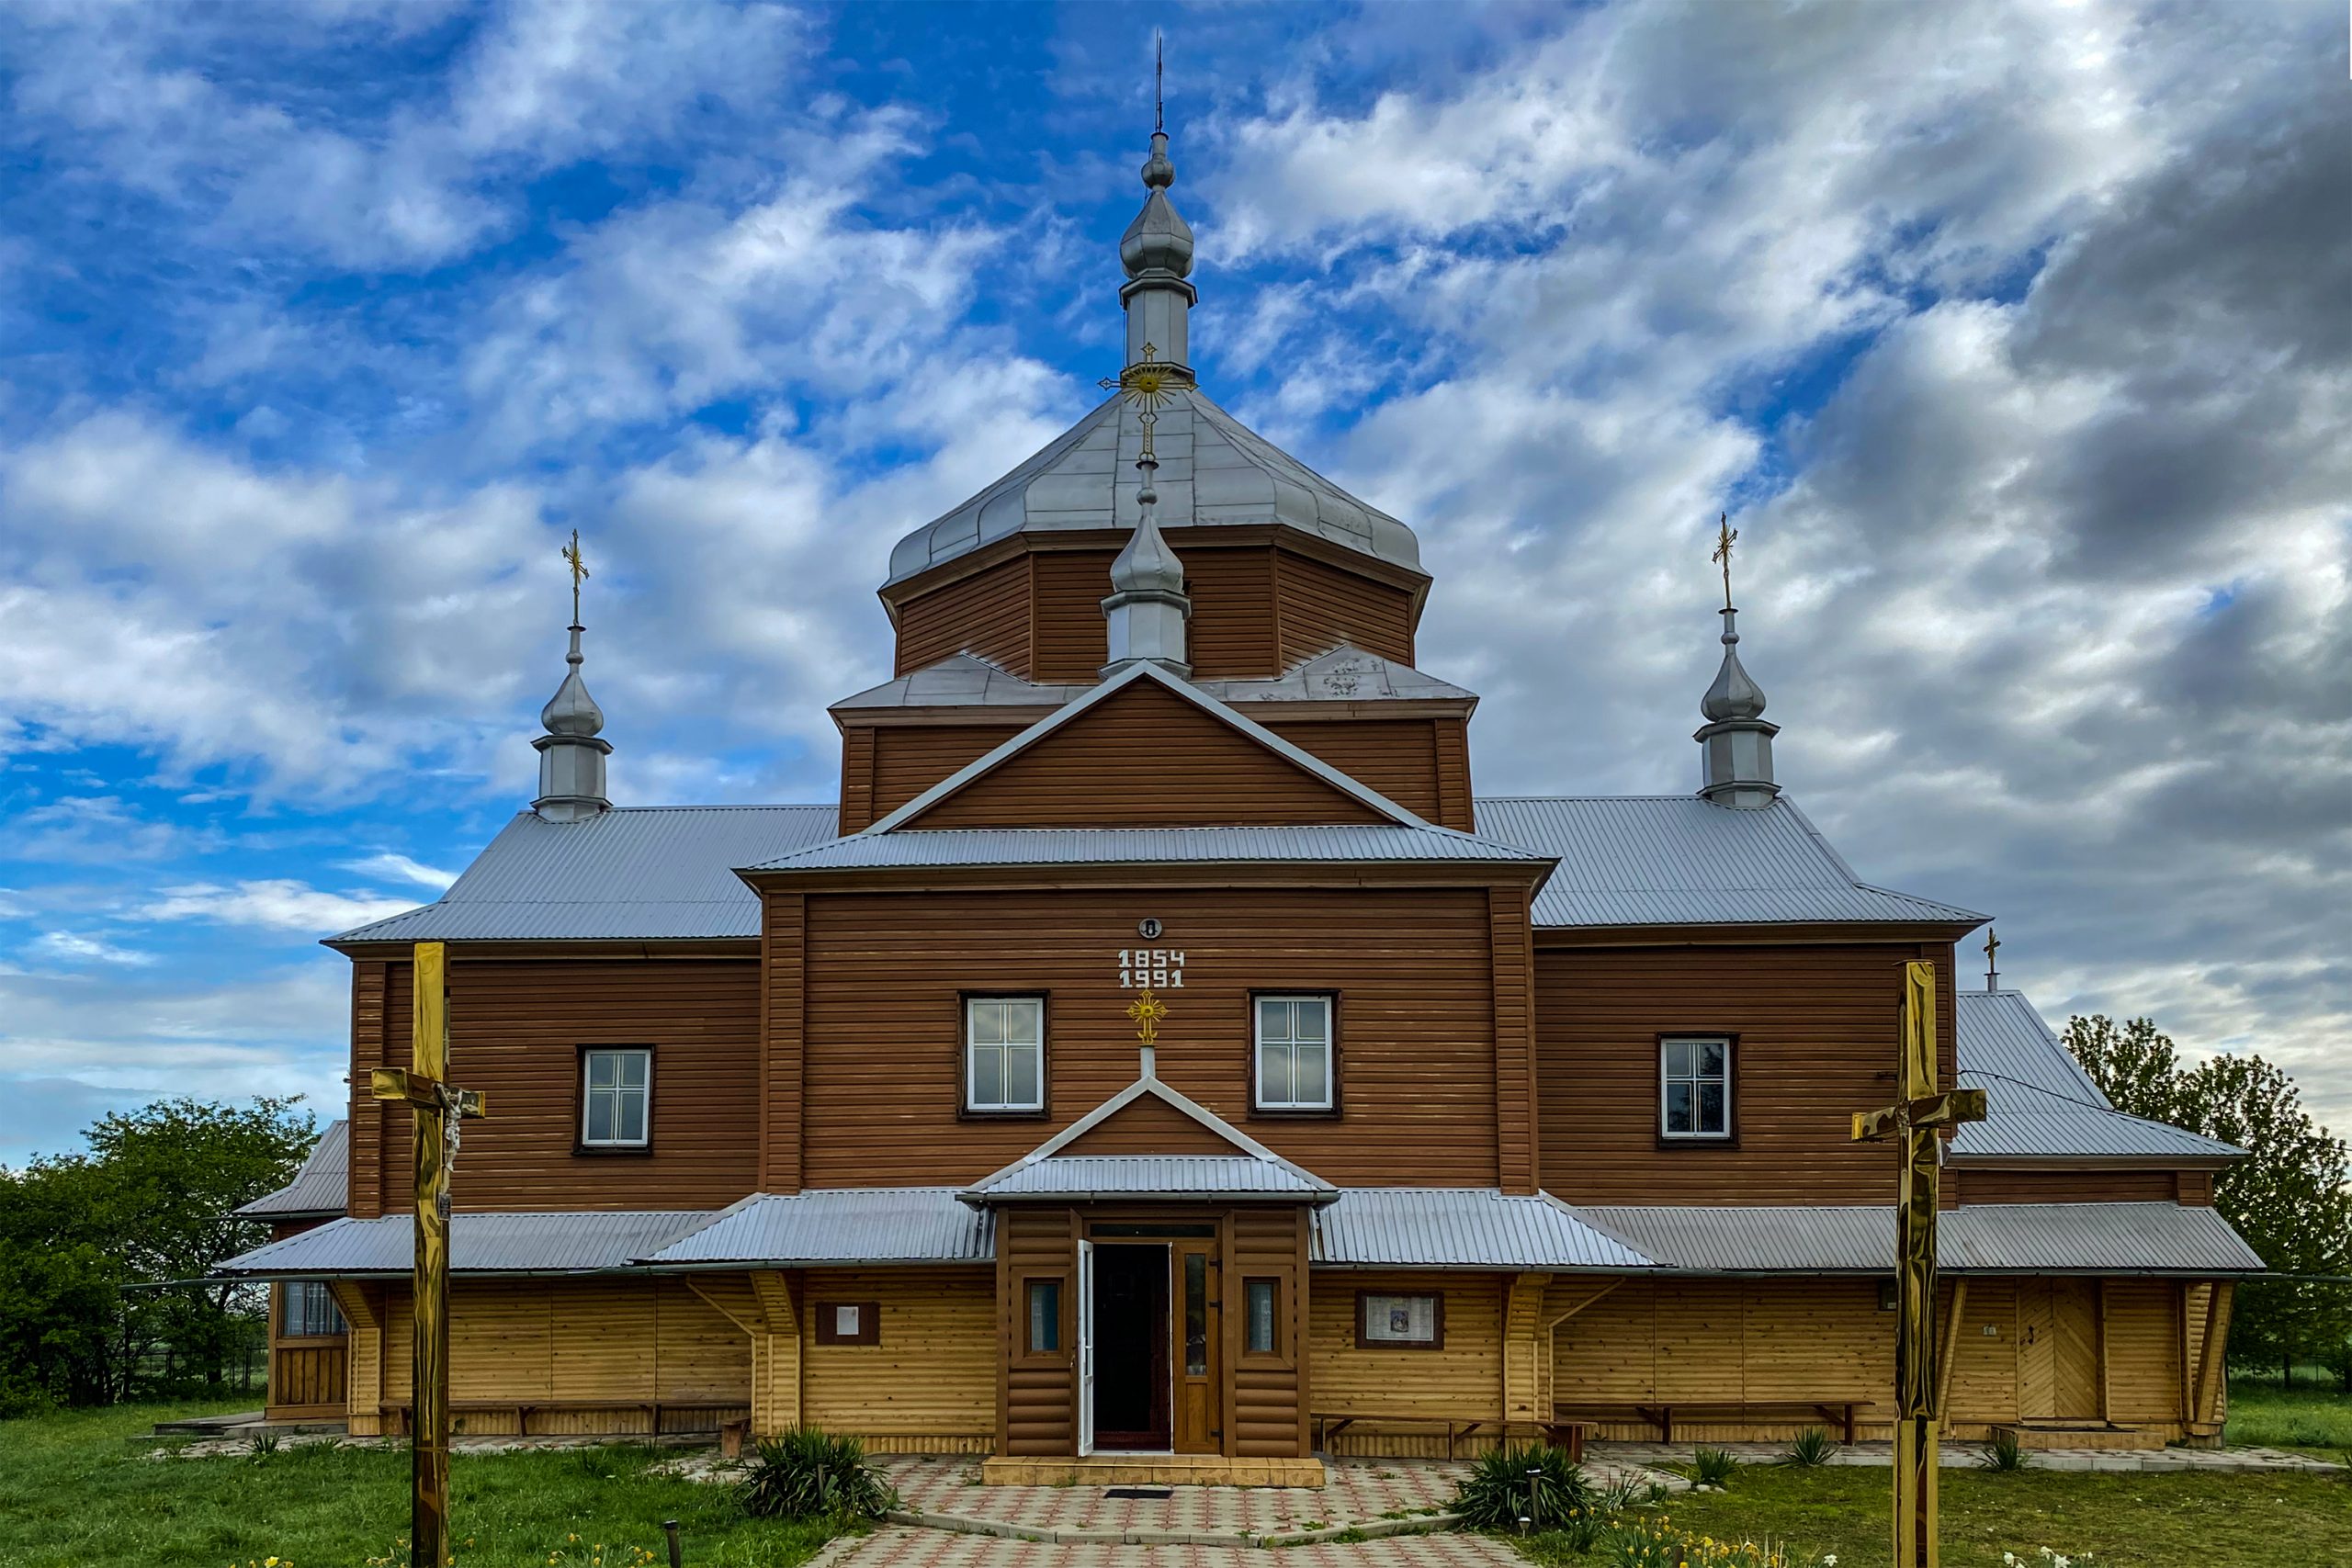 “Dormition of the Mother of God” Church